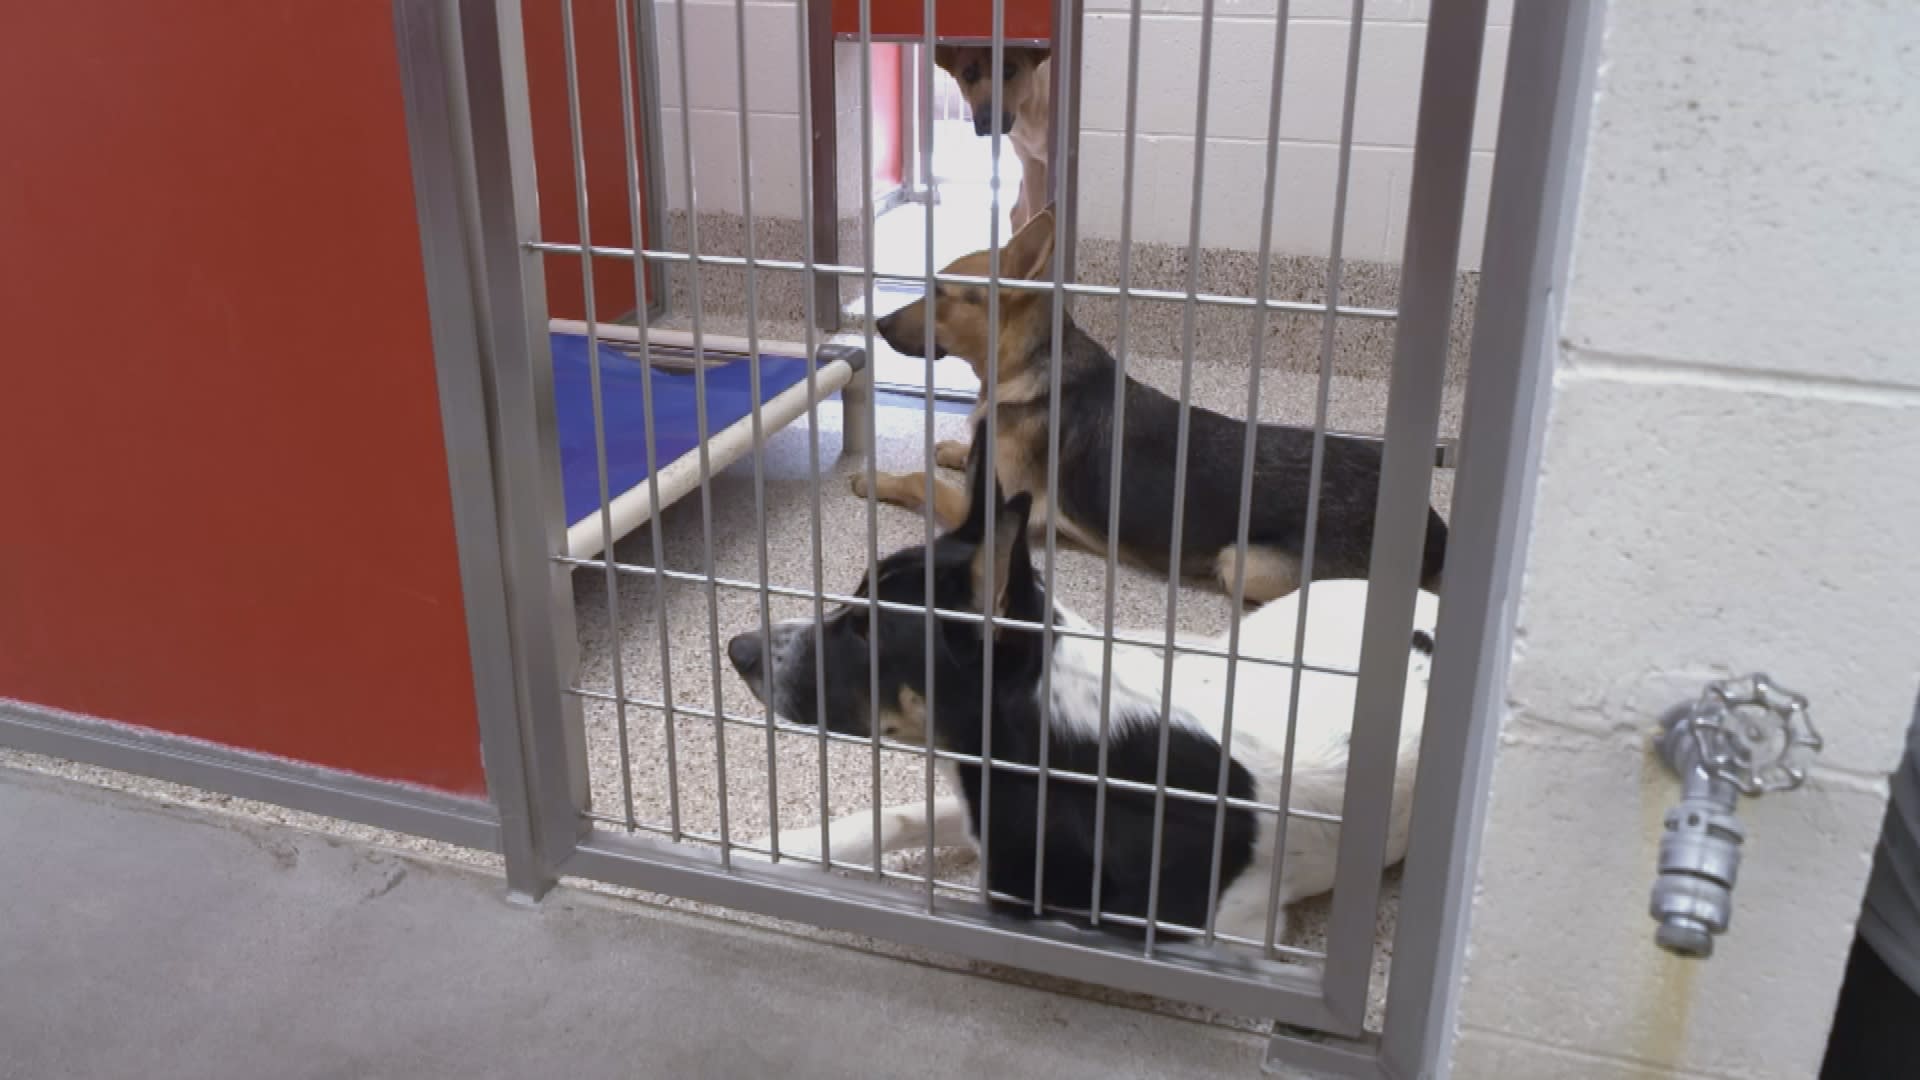 Dogs waiting to be adopted inside Pima Animal Care Center in Tucson, Arizona.